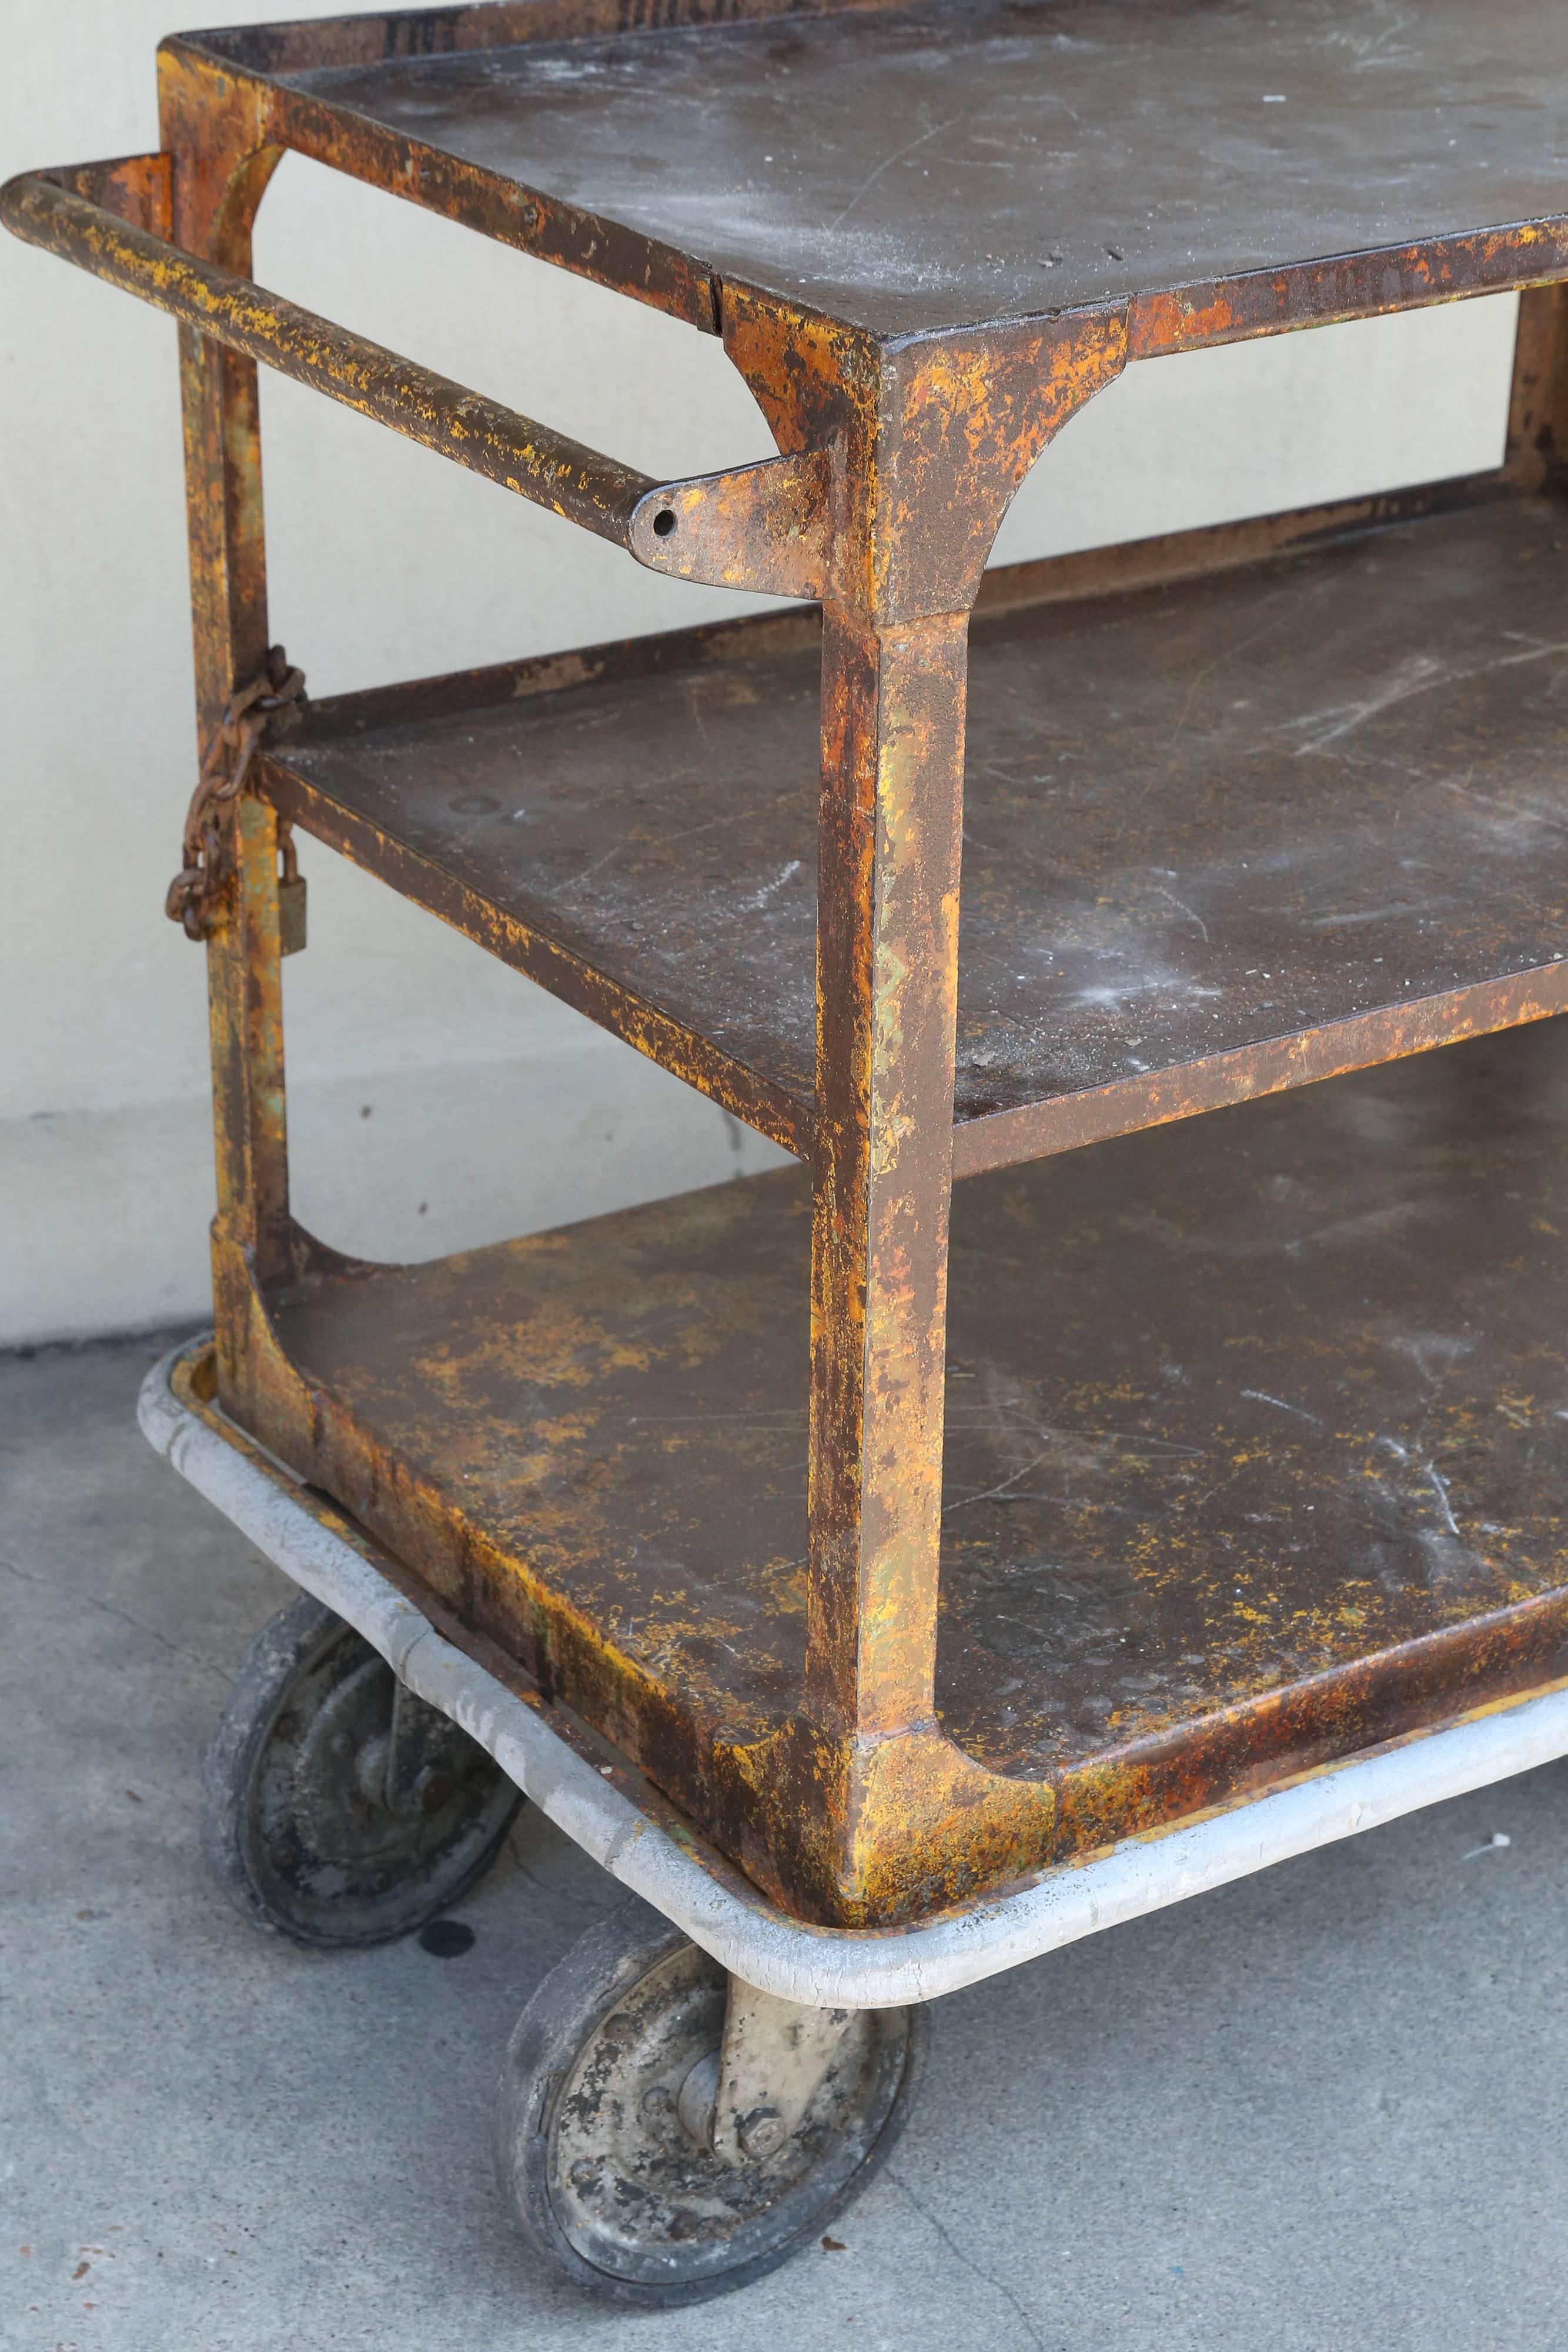 We love an industrial cart for use as a bar cart, and this fantastic cart has all of our favorite things, a distressed finish, large wheels that allow for smooth movement and plenty of space for bottles, glasses, trays and ice buckets! This metal